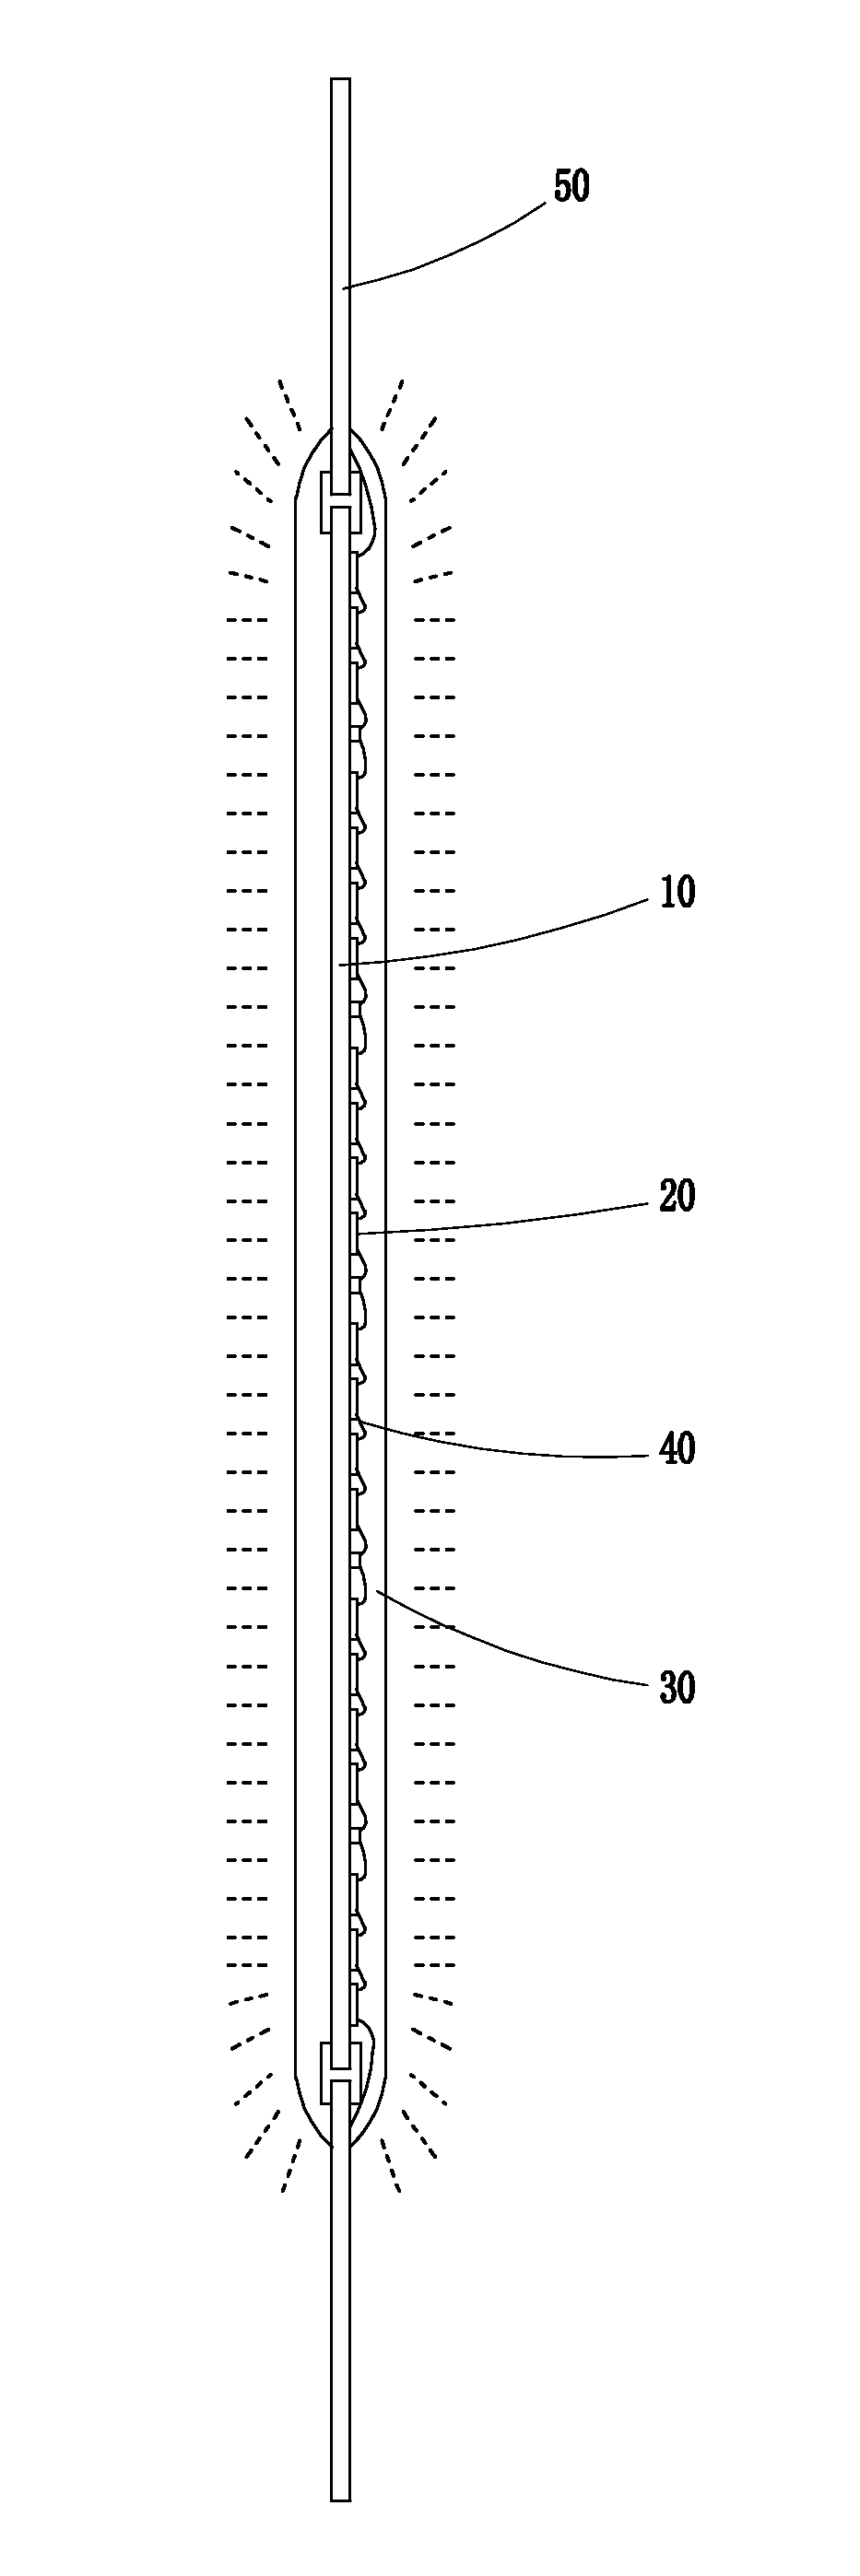 LED light and filament thereof